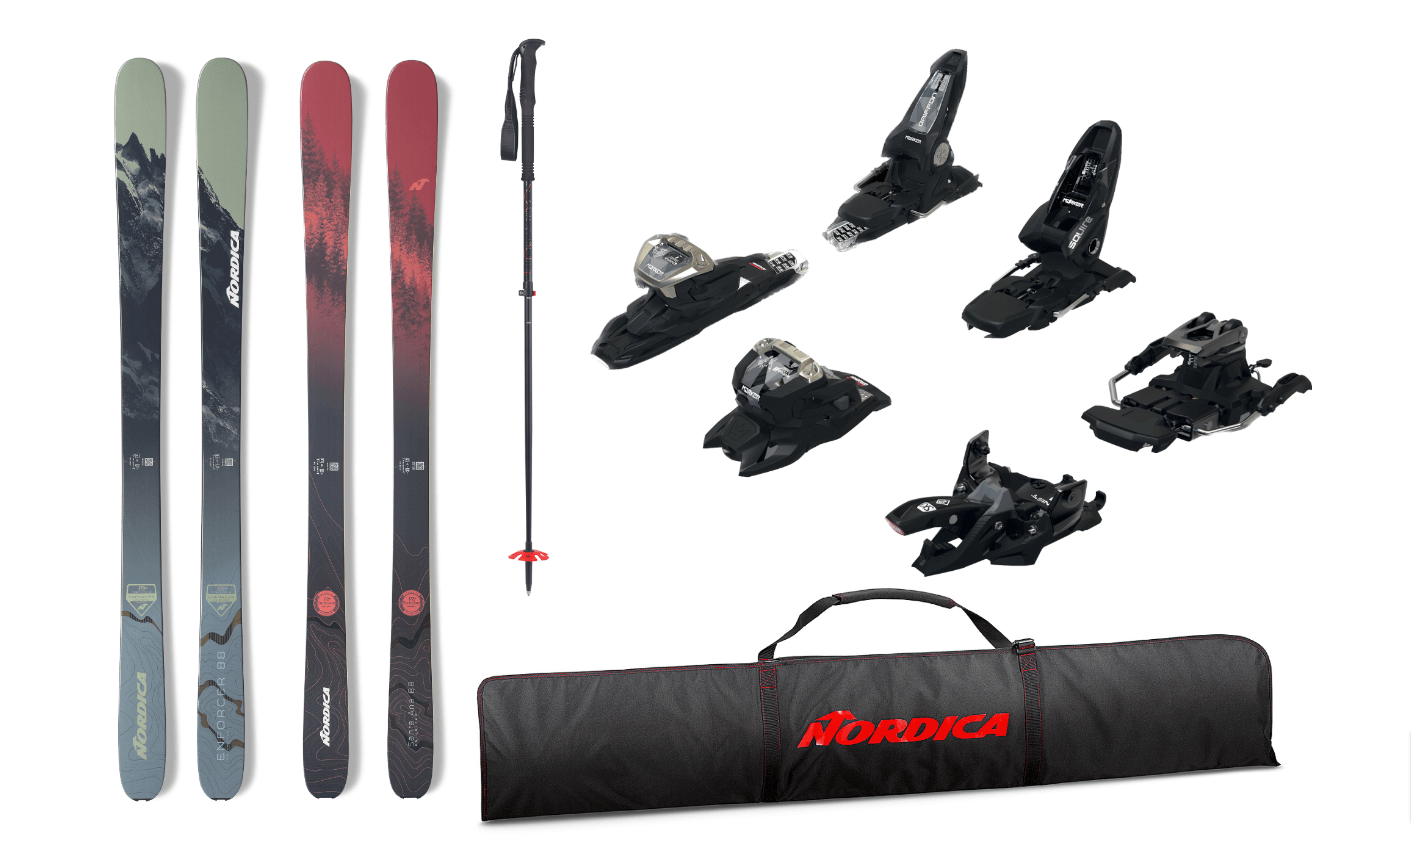 Win a Nordica Ski Bundle with the Fall Line Skiing Magazine